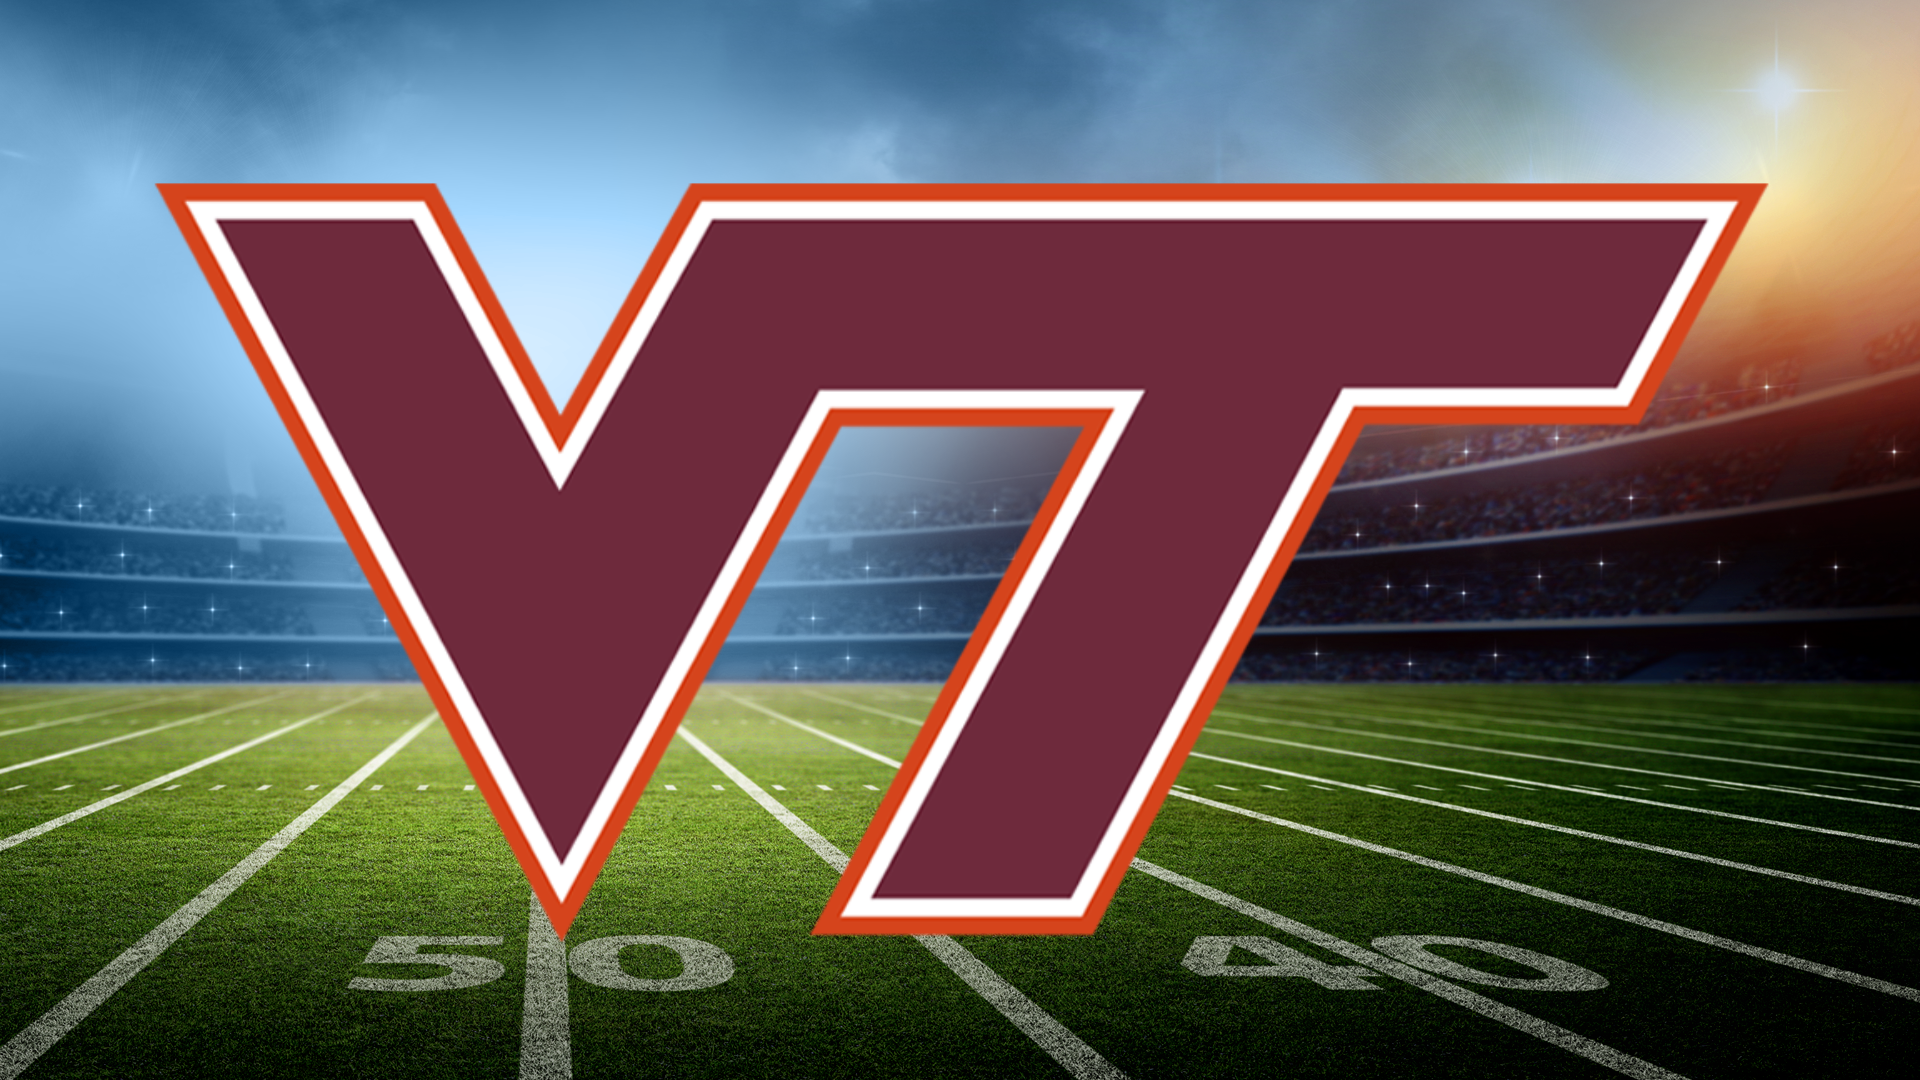 VT vs ODU Game Watching at Home Team Grill in The Fan